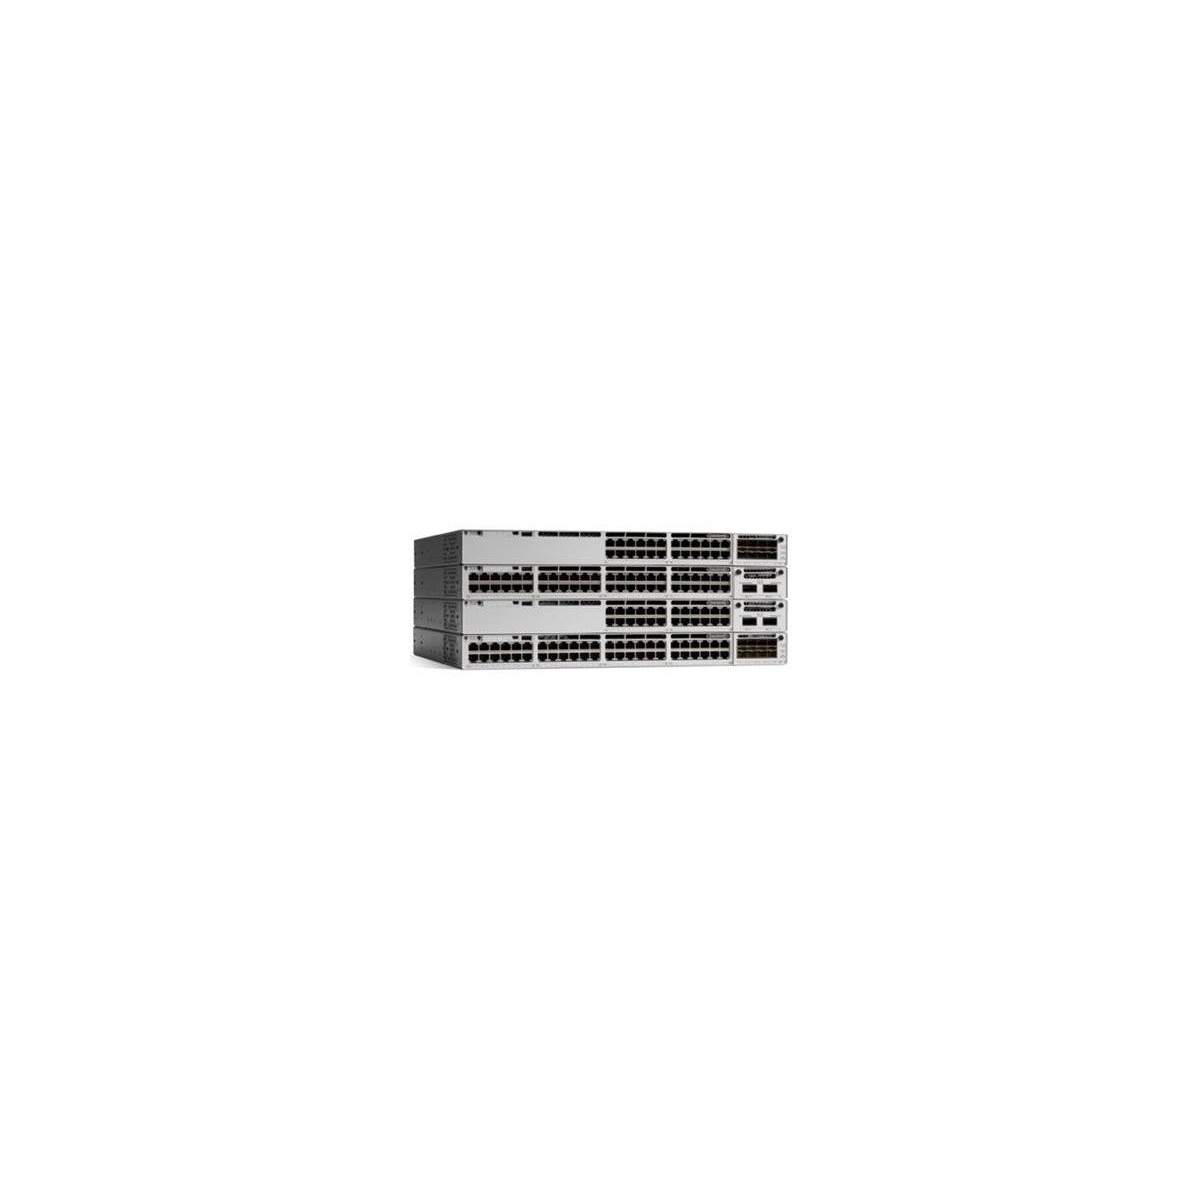 Cisco CAT 9300L 48P FULL POE Network - 1 Gbps - Amount of ports: